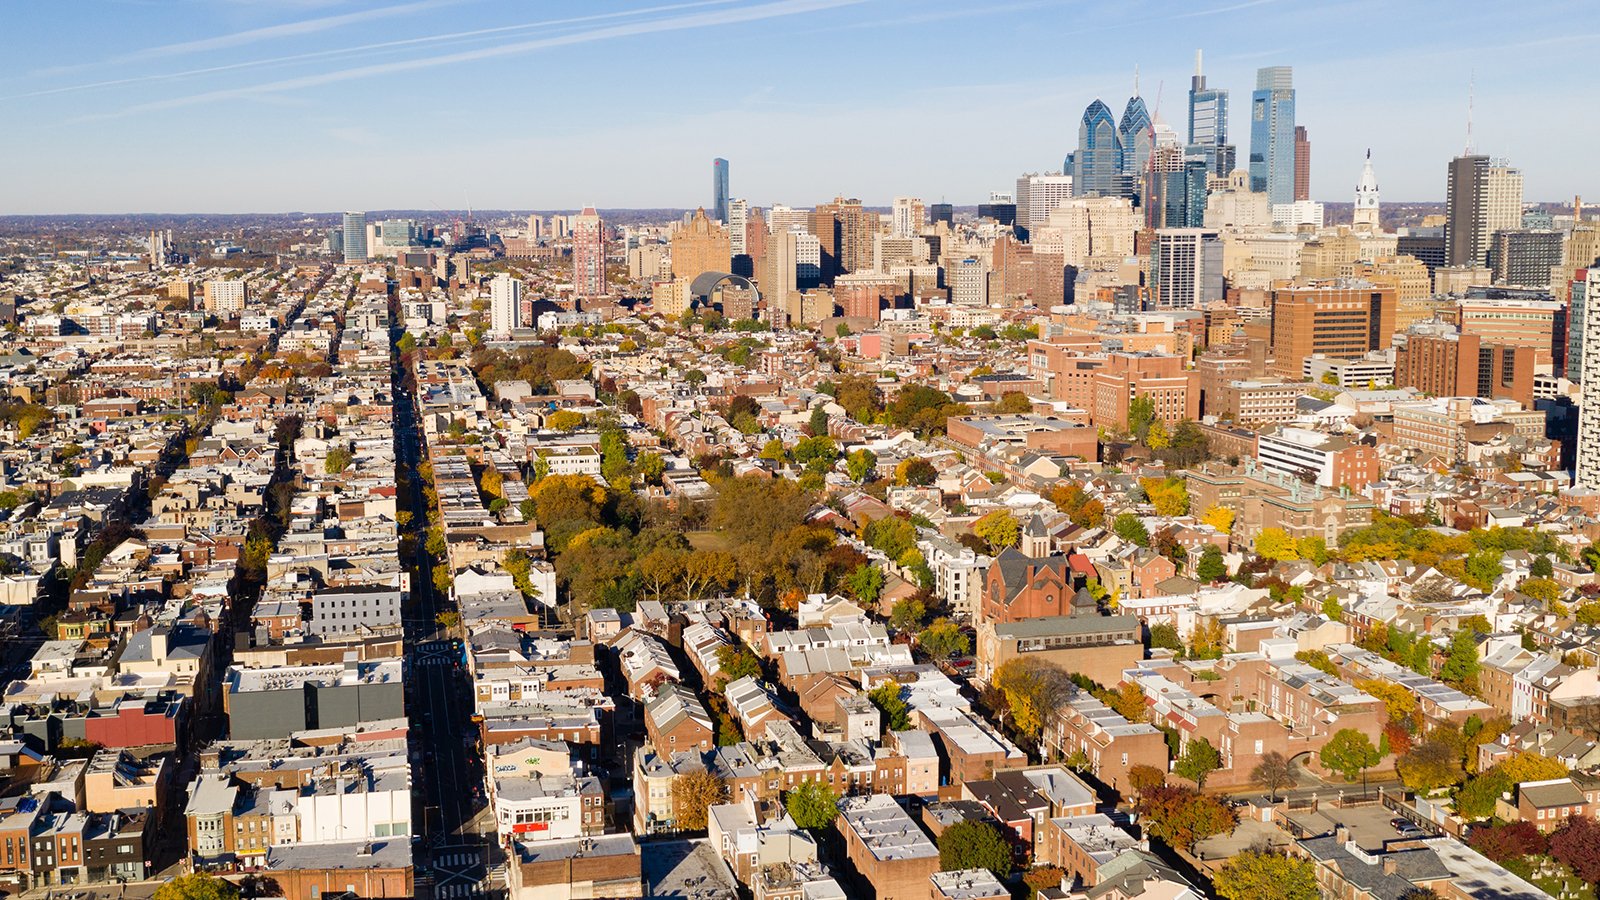 The skyline of Philadelphia with densely populated neighborhoods in the foreground.